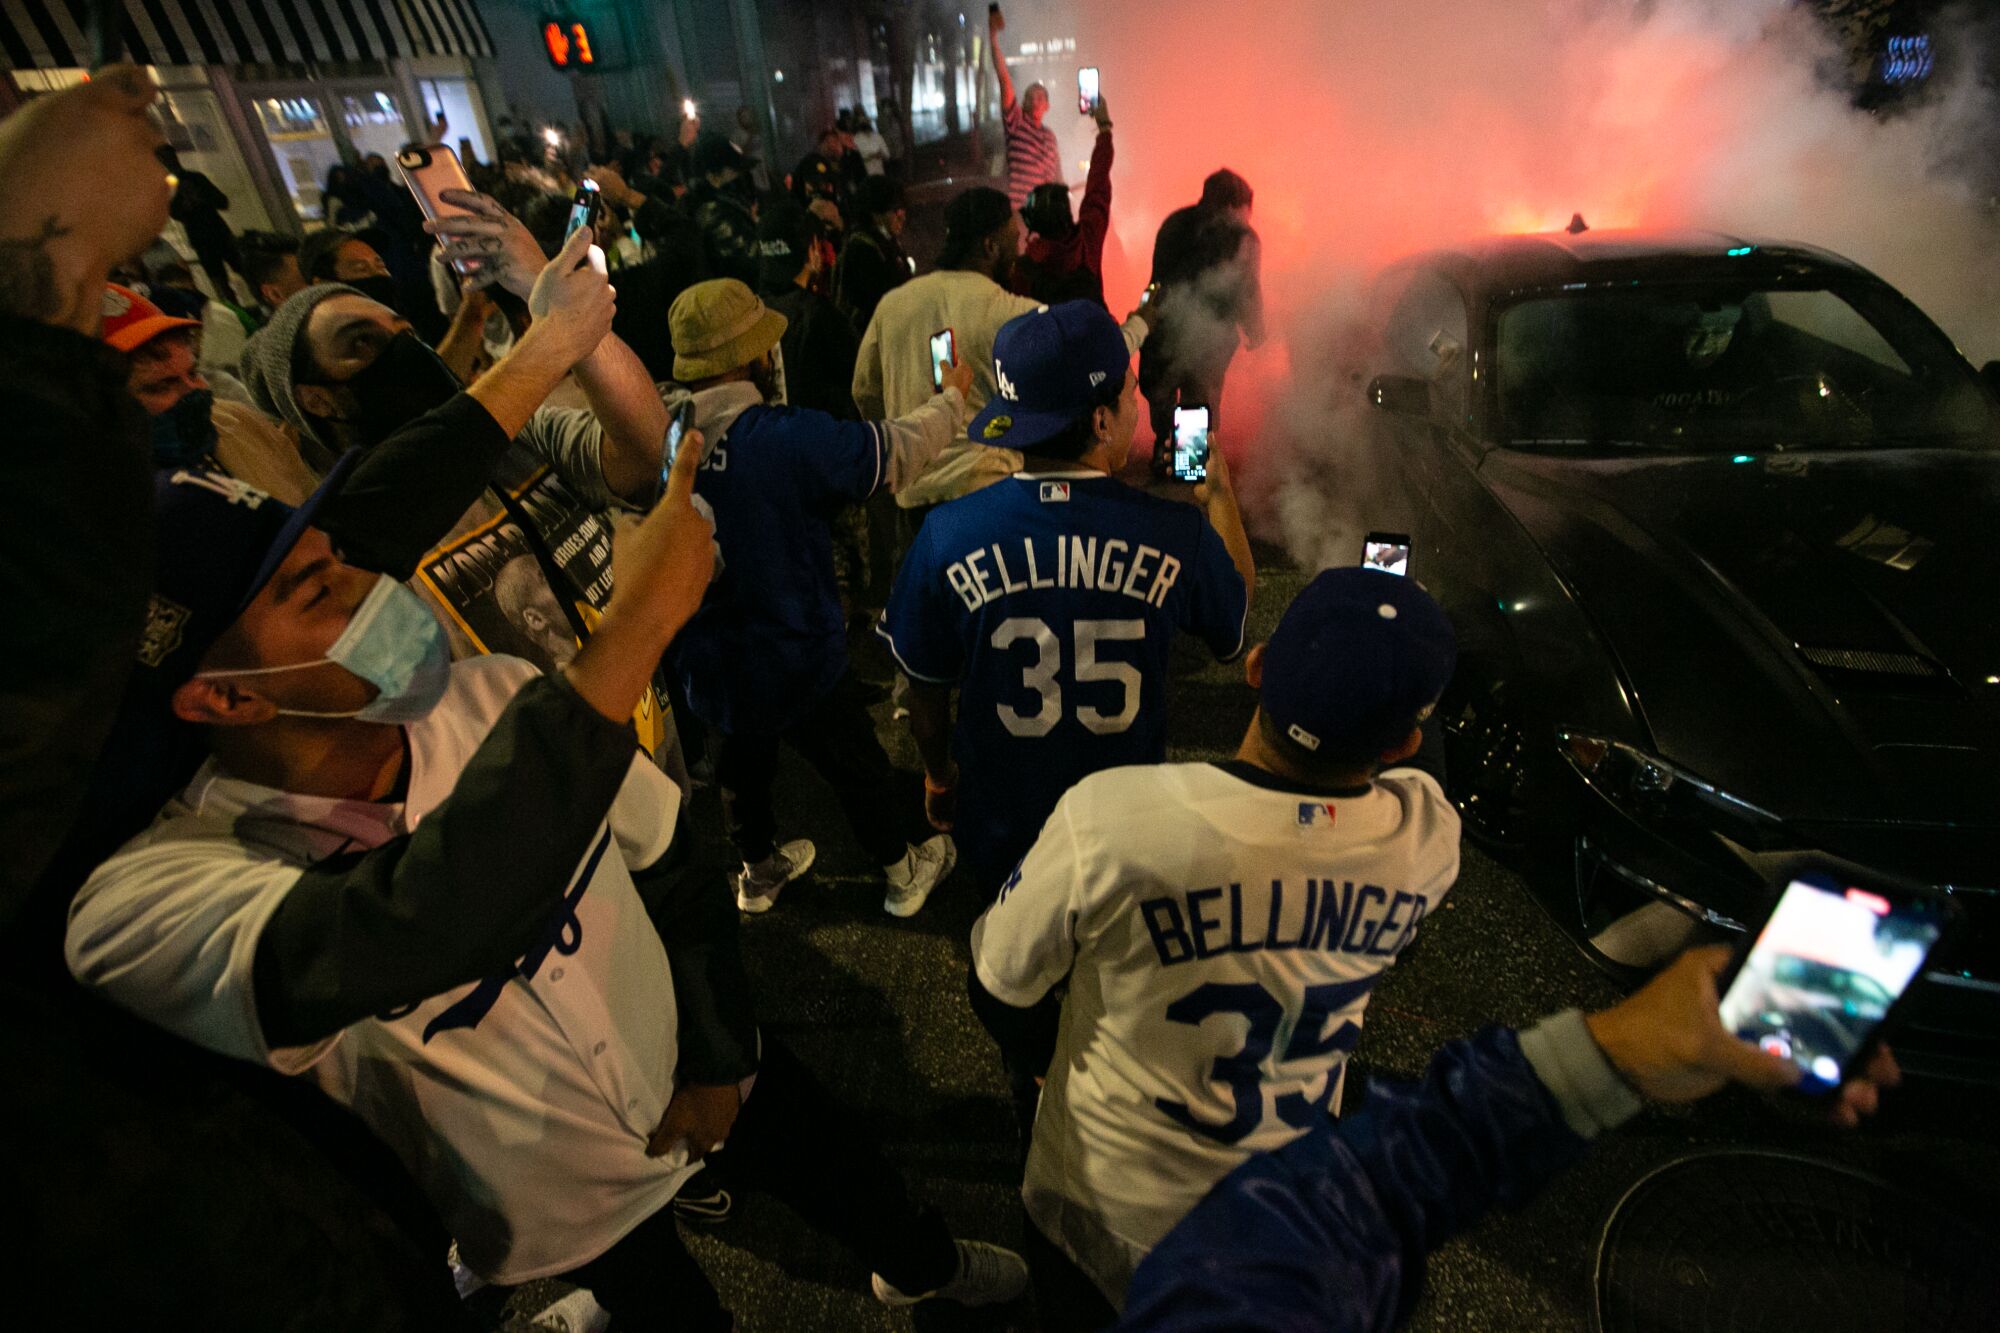 Fans in L.A., some in Dodgers jerseys, crowd together near a car, taking photos as smoke billows from its tires. 